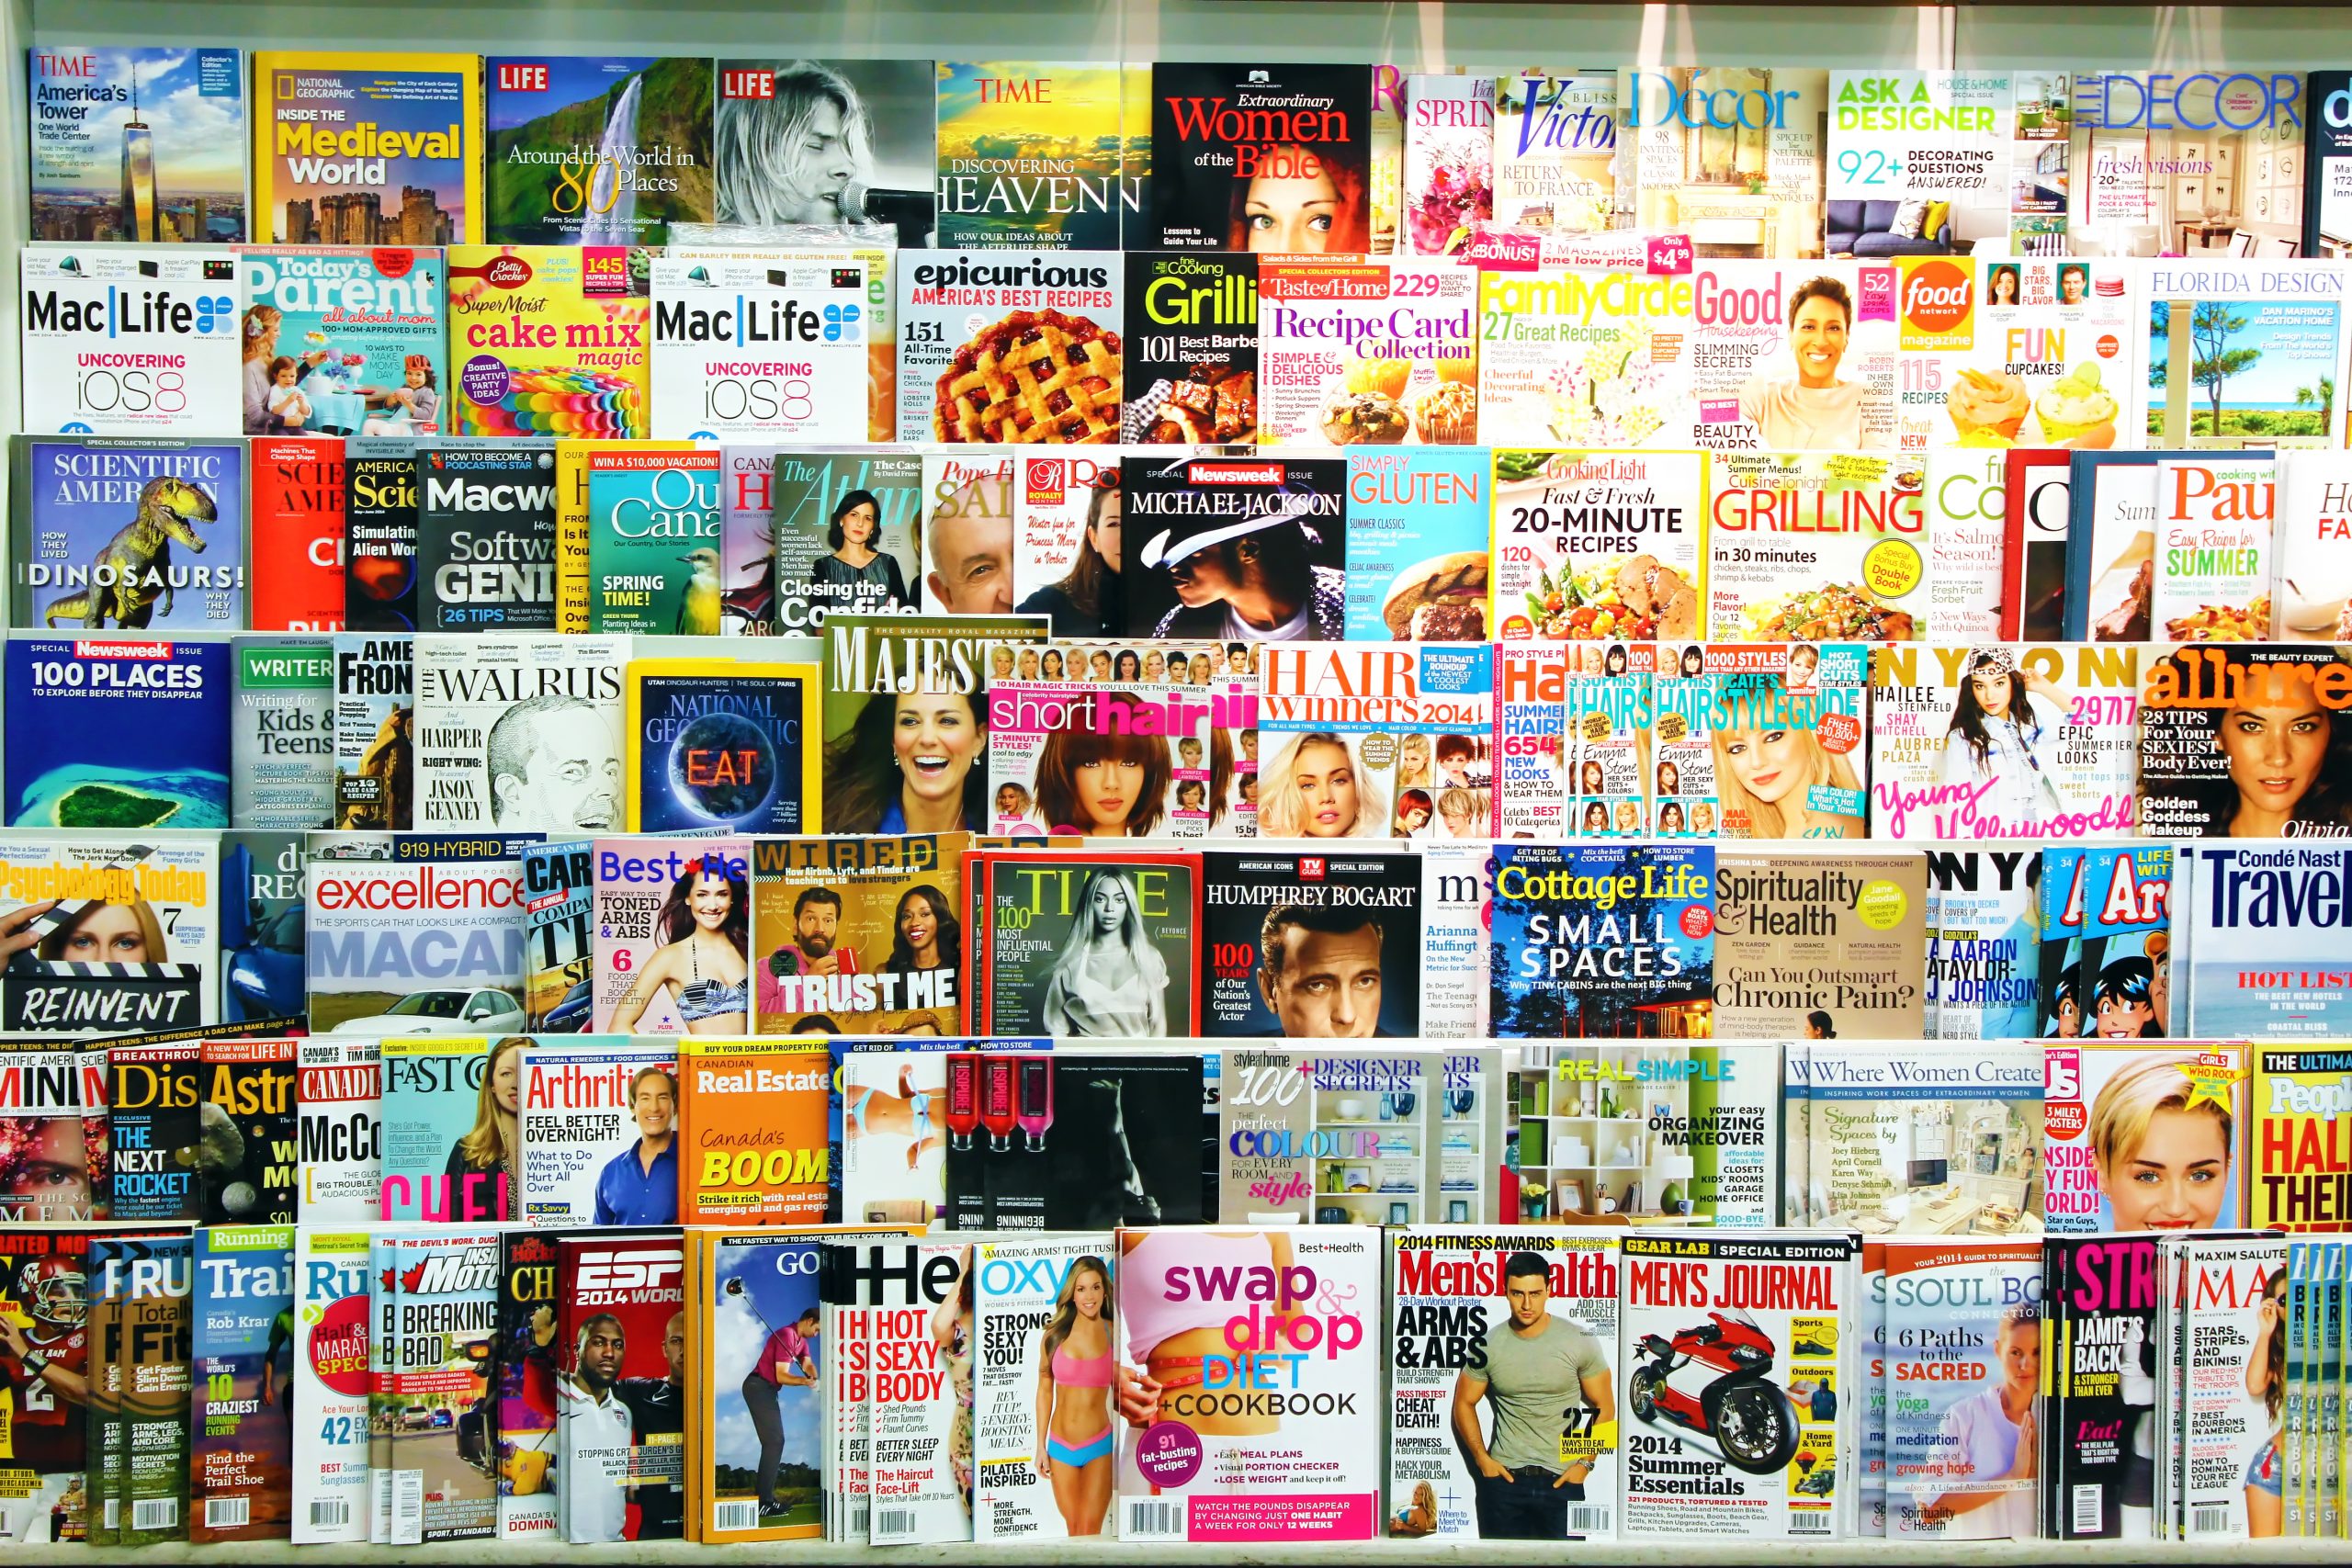 Print Magazines Aren't Dying and Here's Why